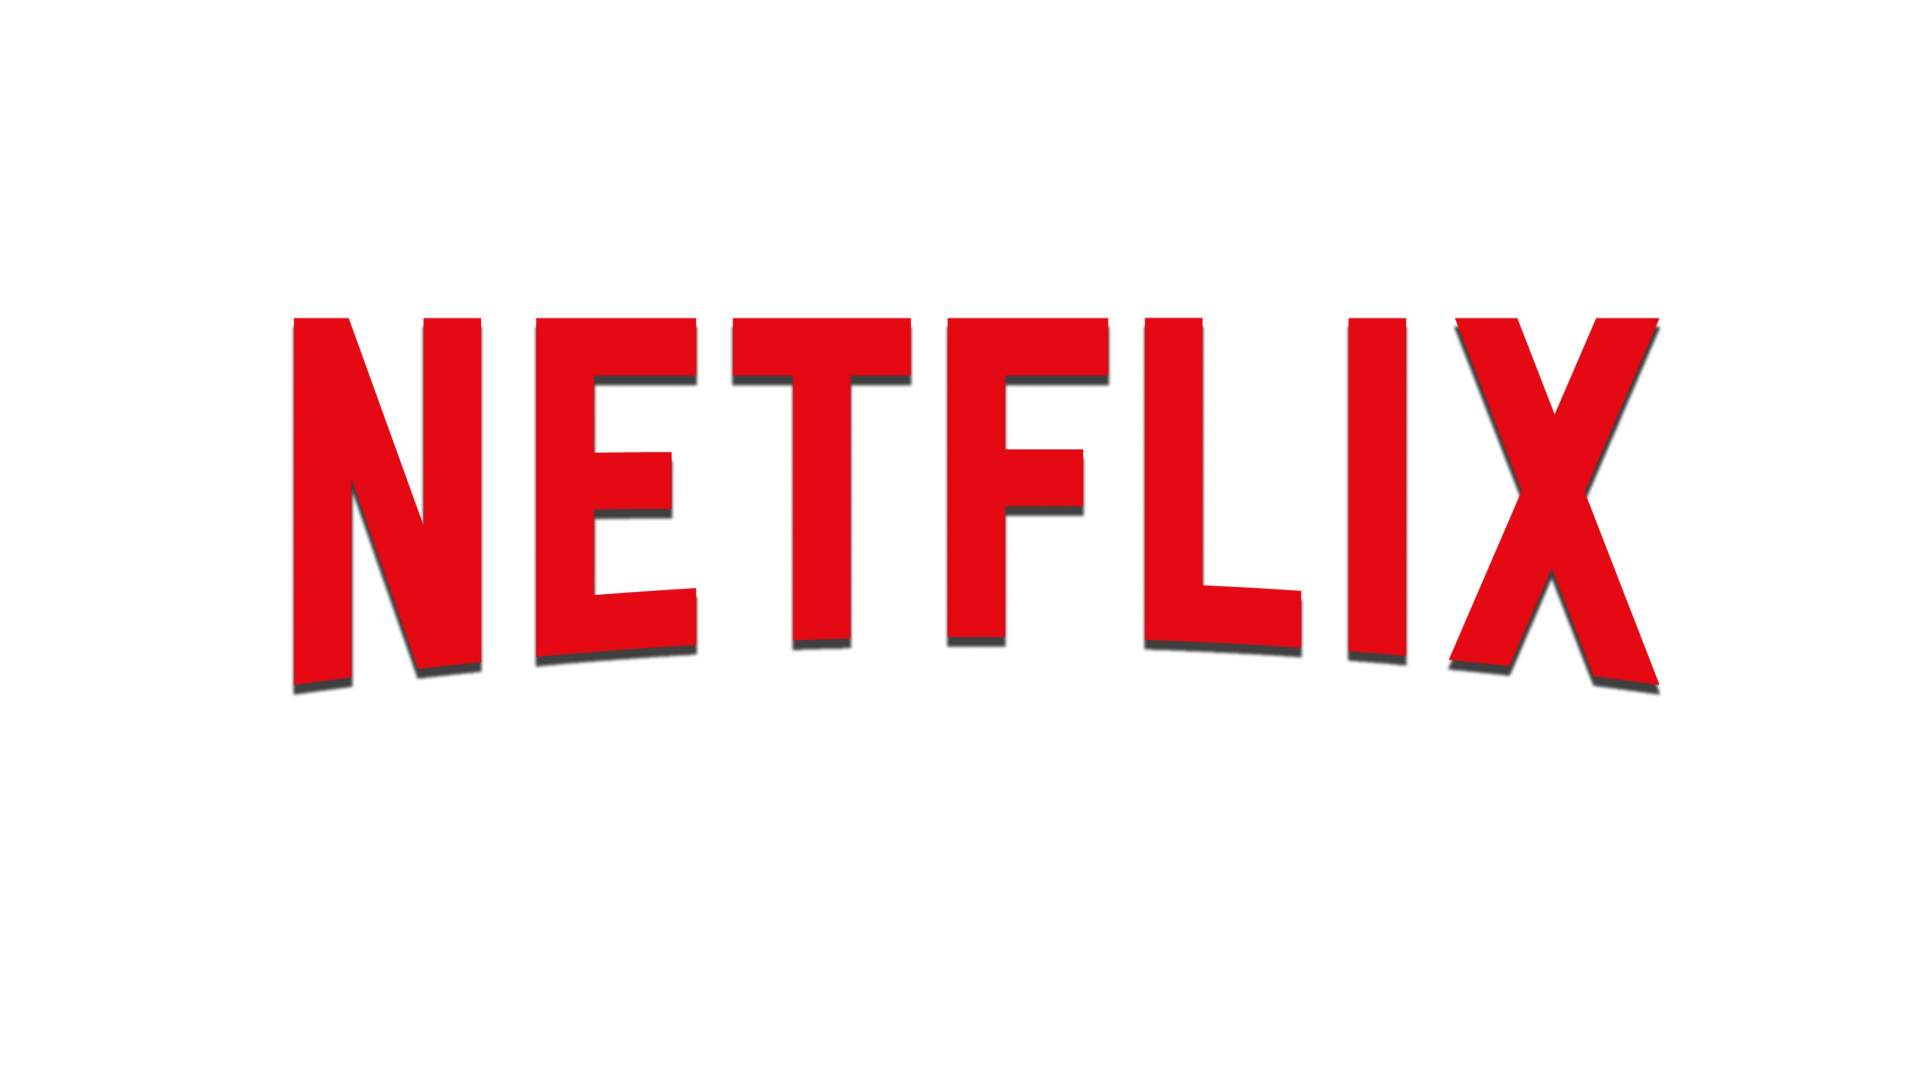 Netflix exclusively acquires all Sony movies - Spider-Man, Jumanji, Bad Boys and many more